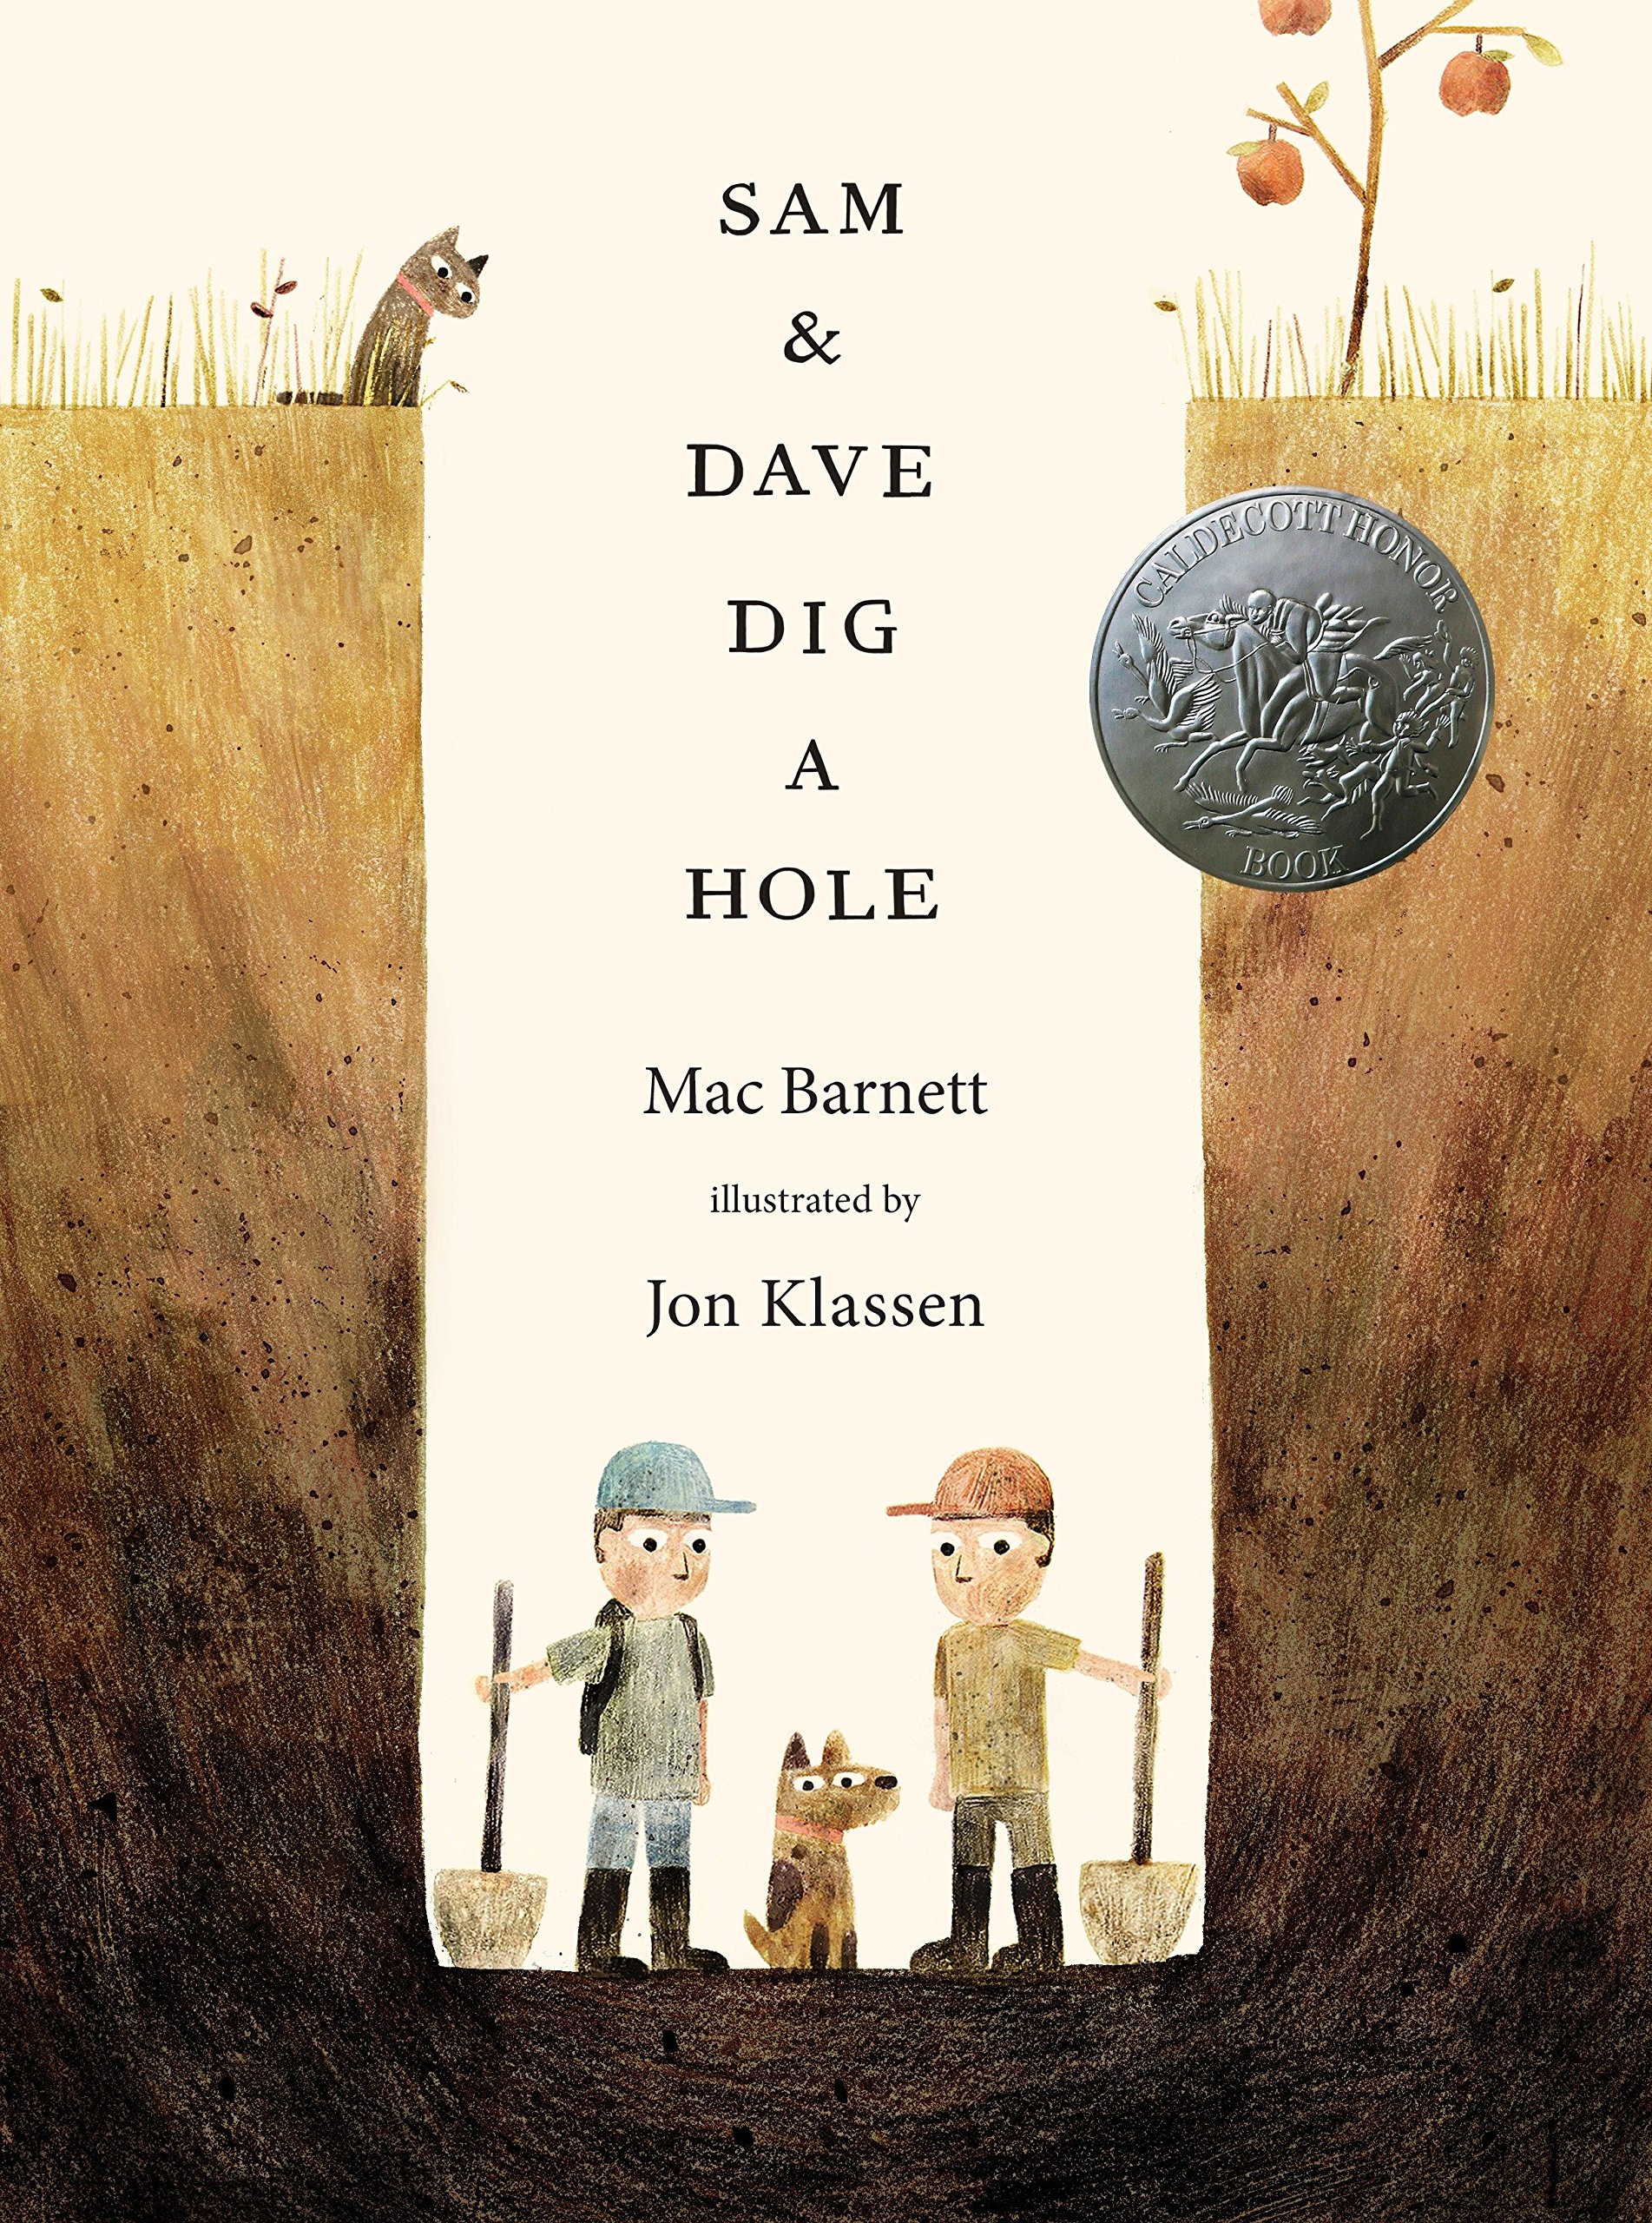 Book cover for "Sam & Dave Dig A Hole"